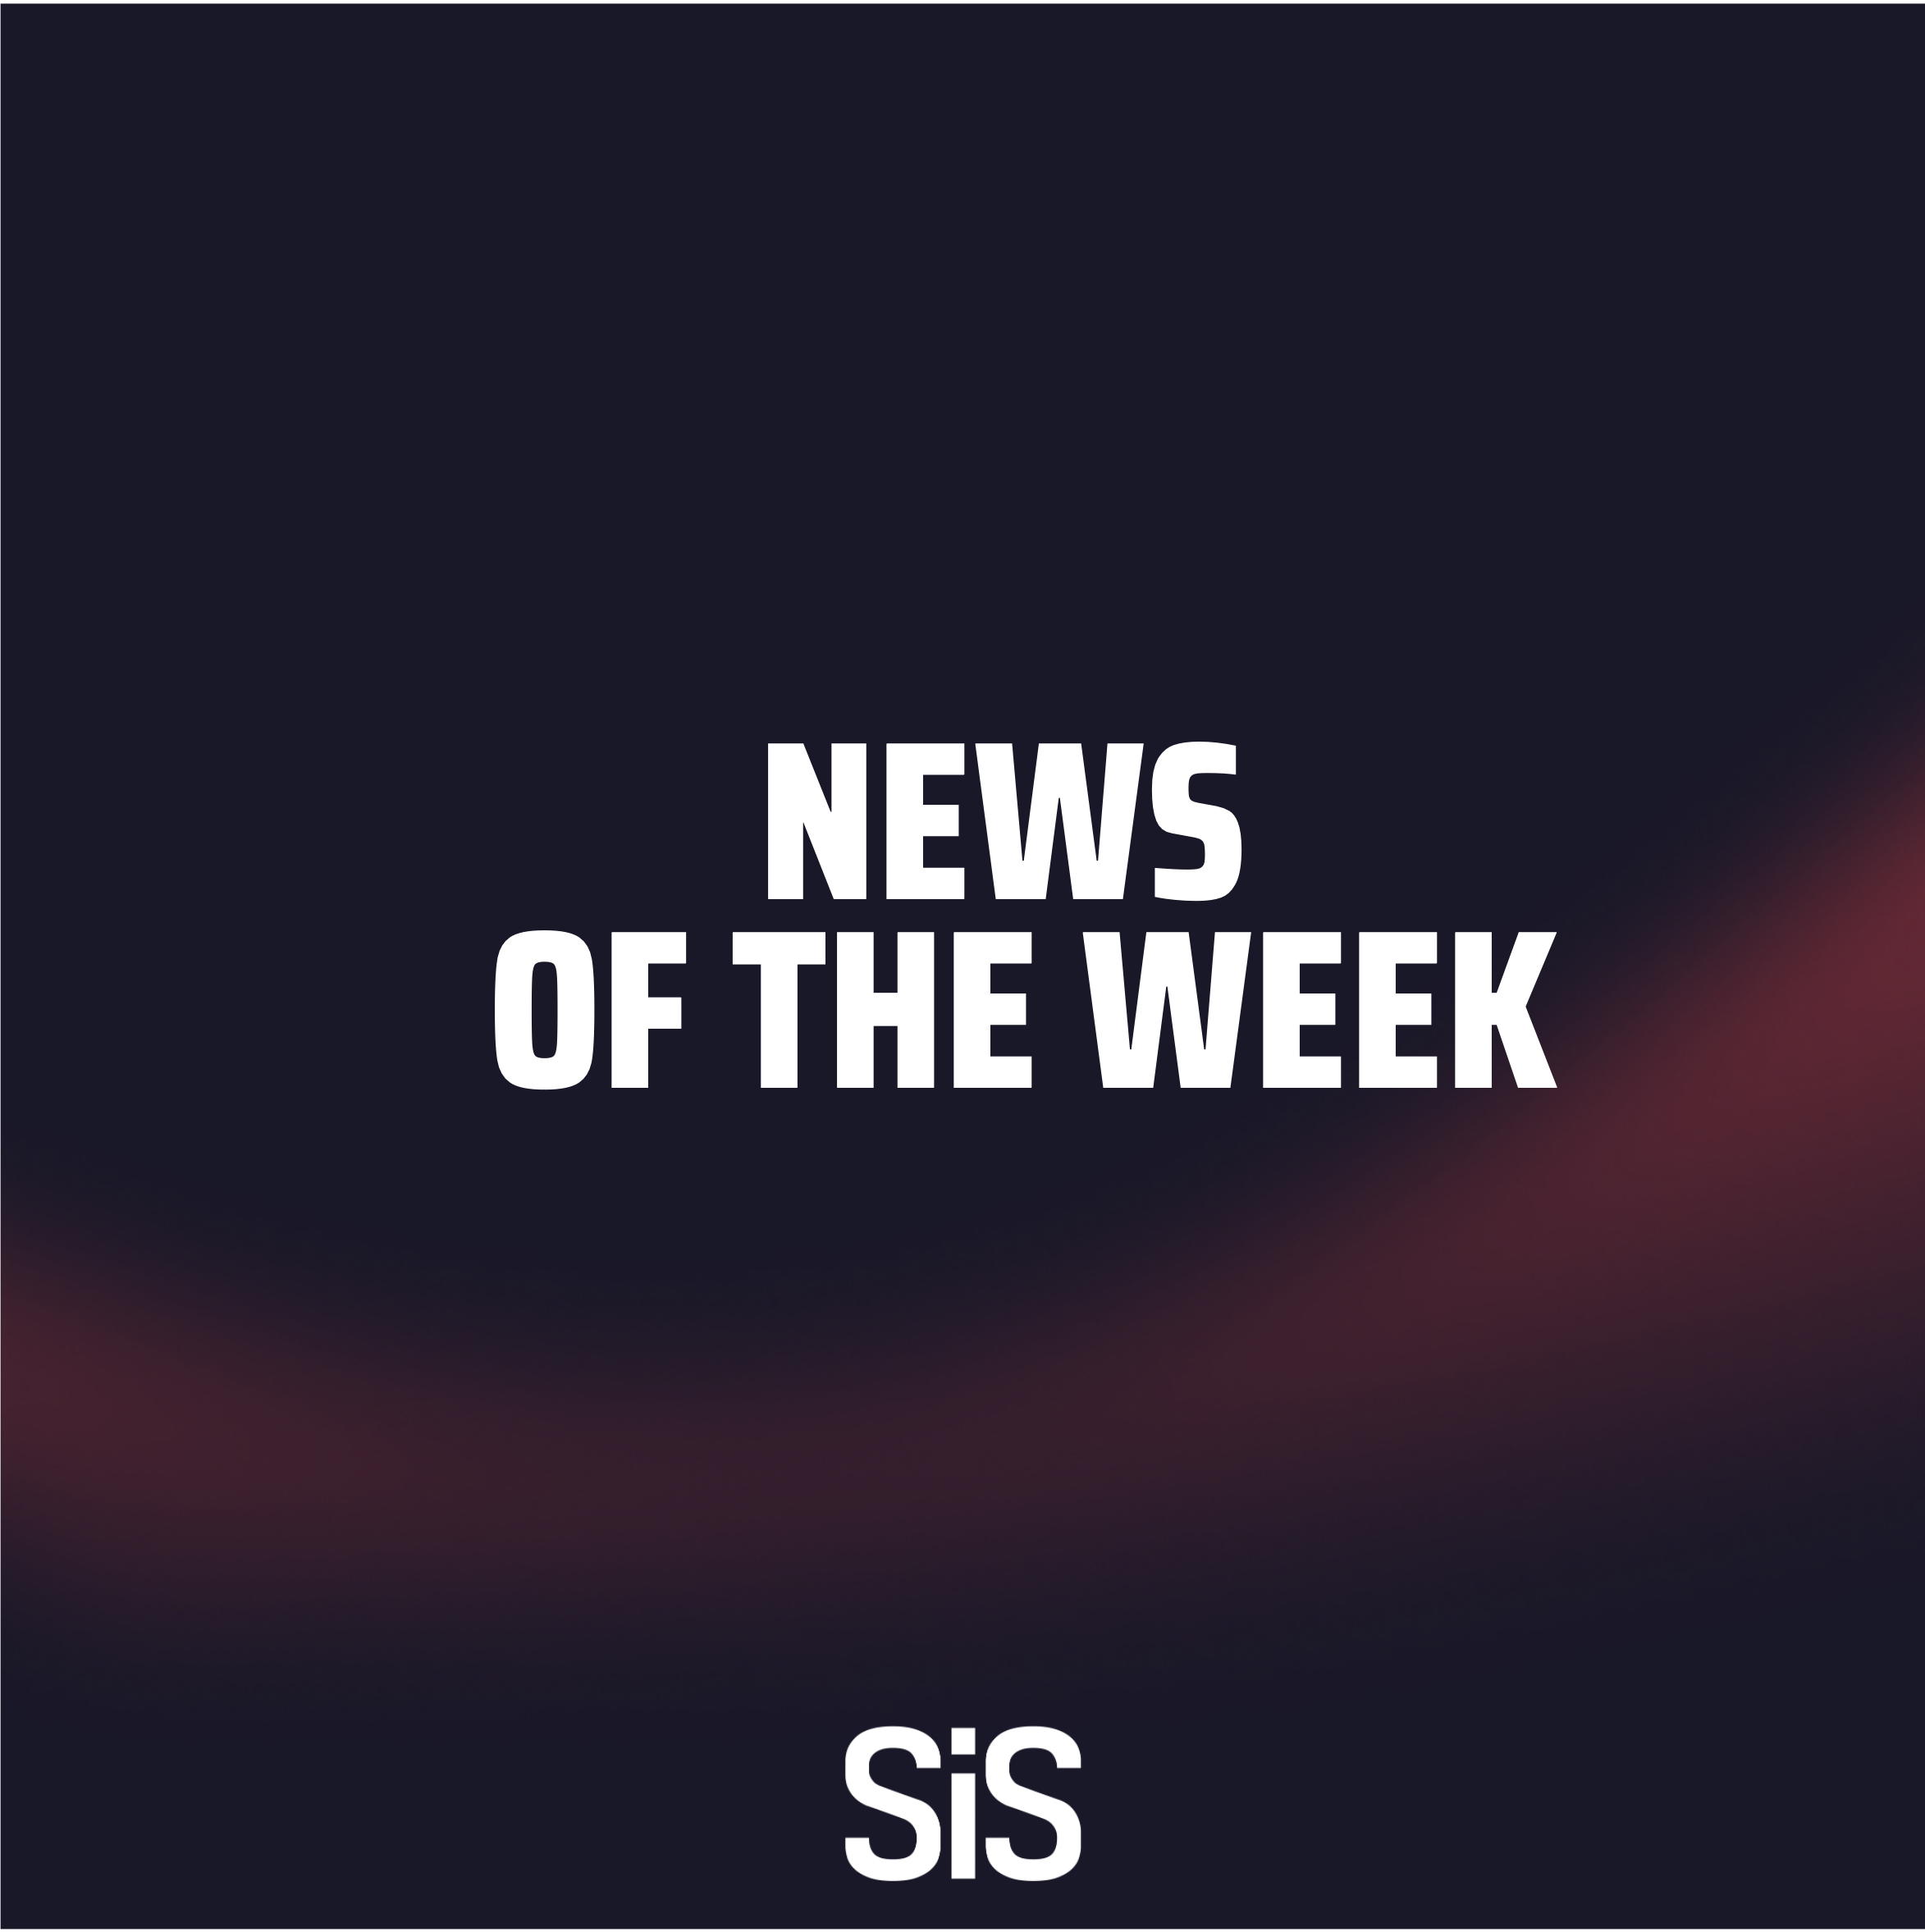 News of the week